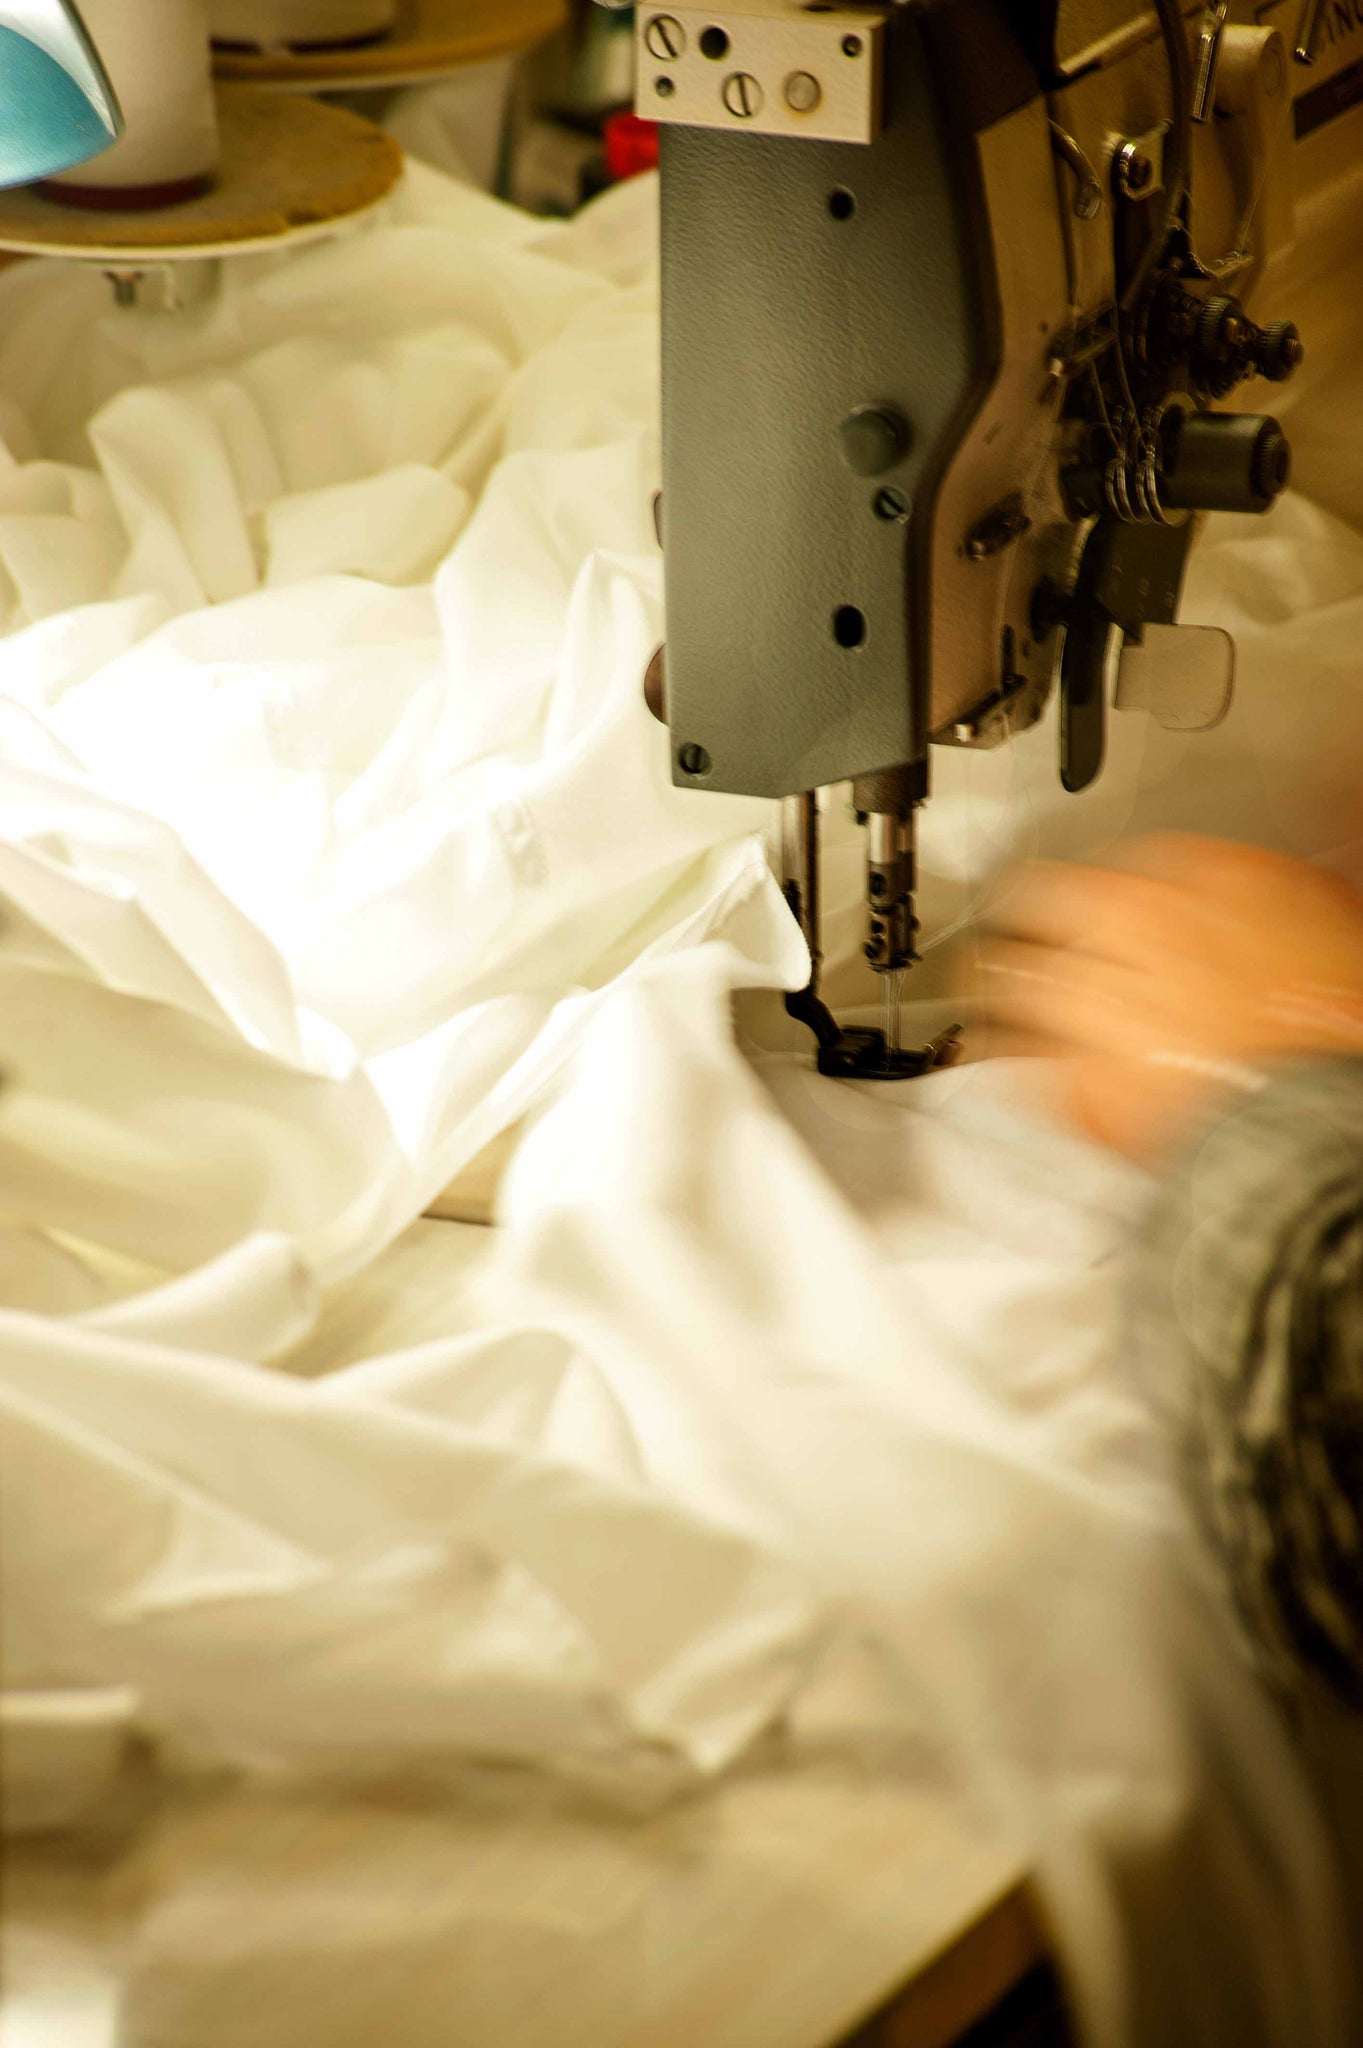 Photograph in maker's studio of fabric being sewn.